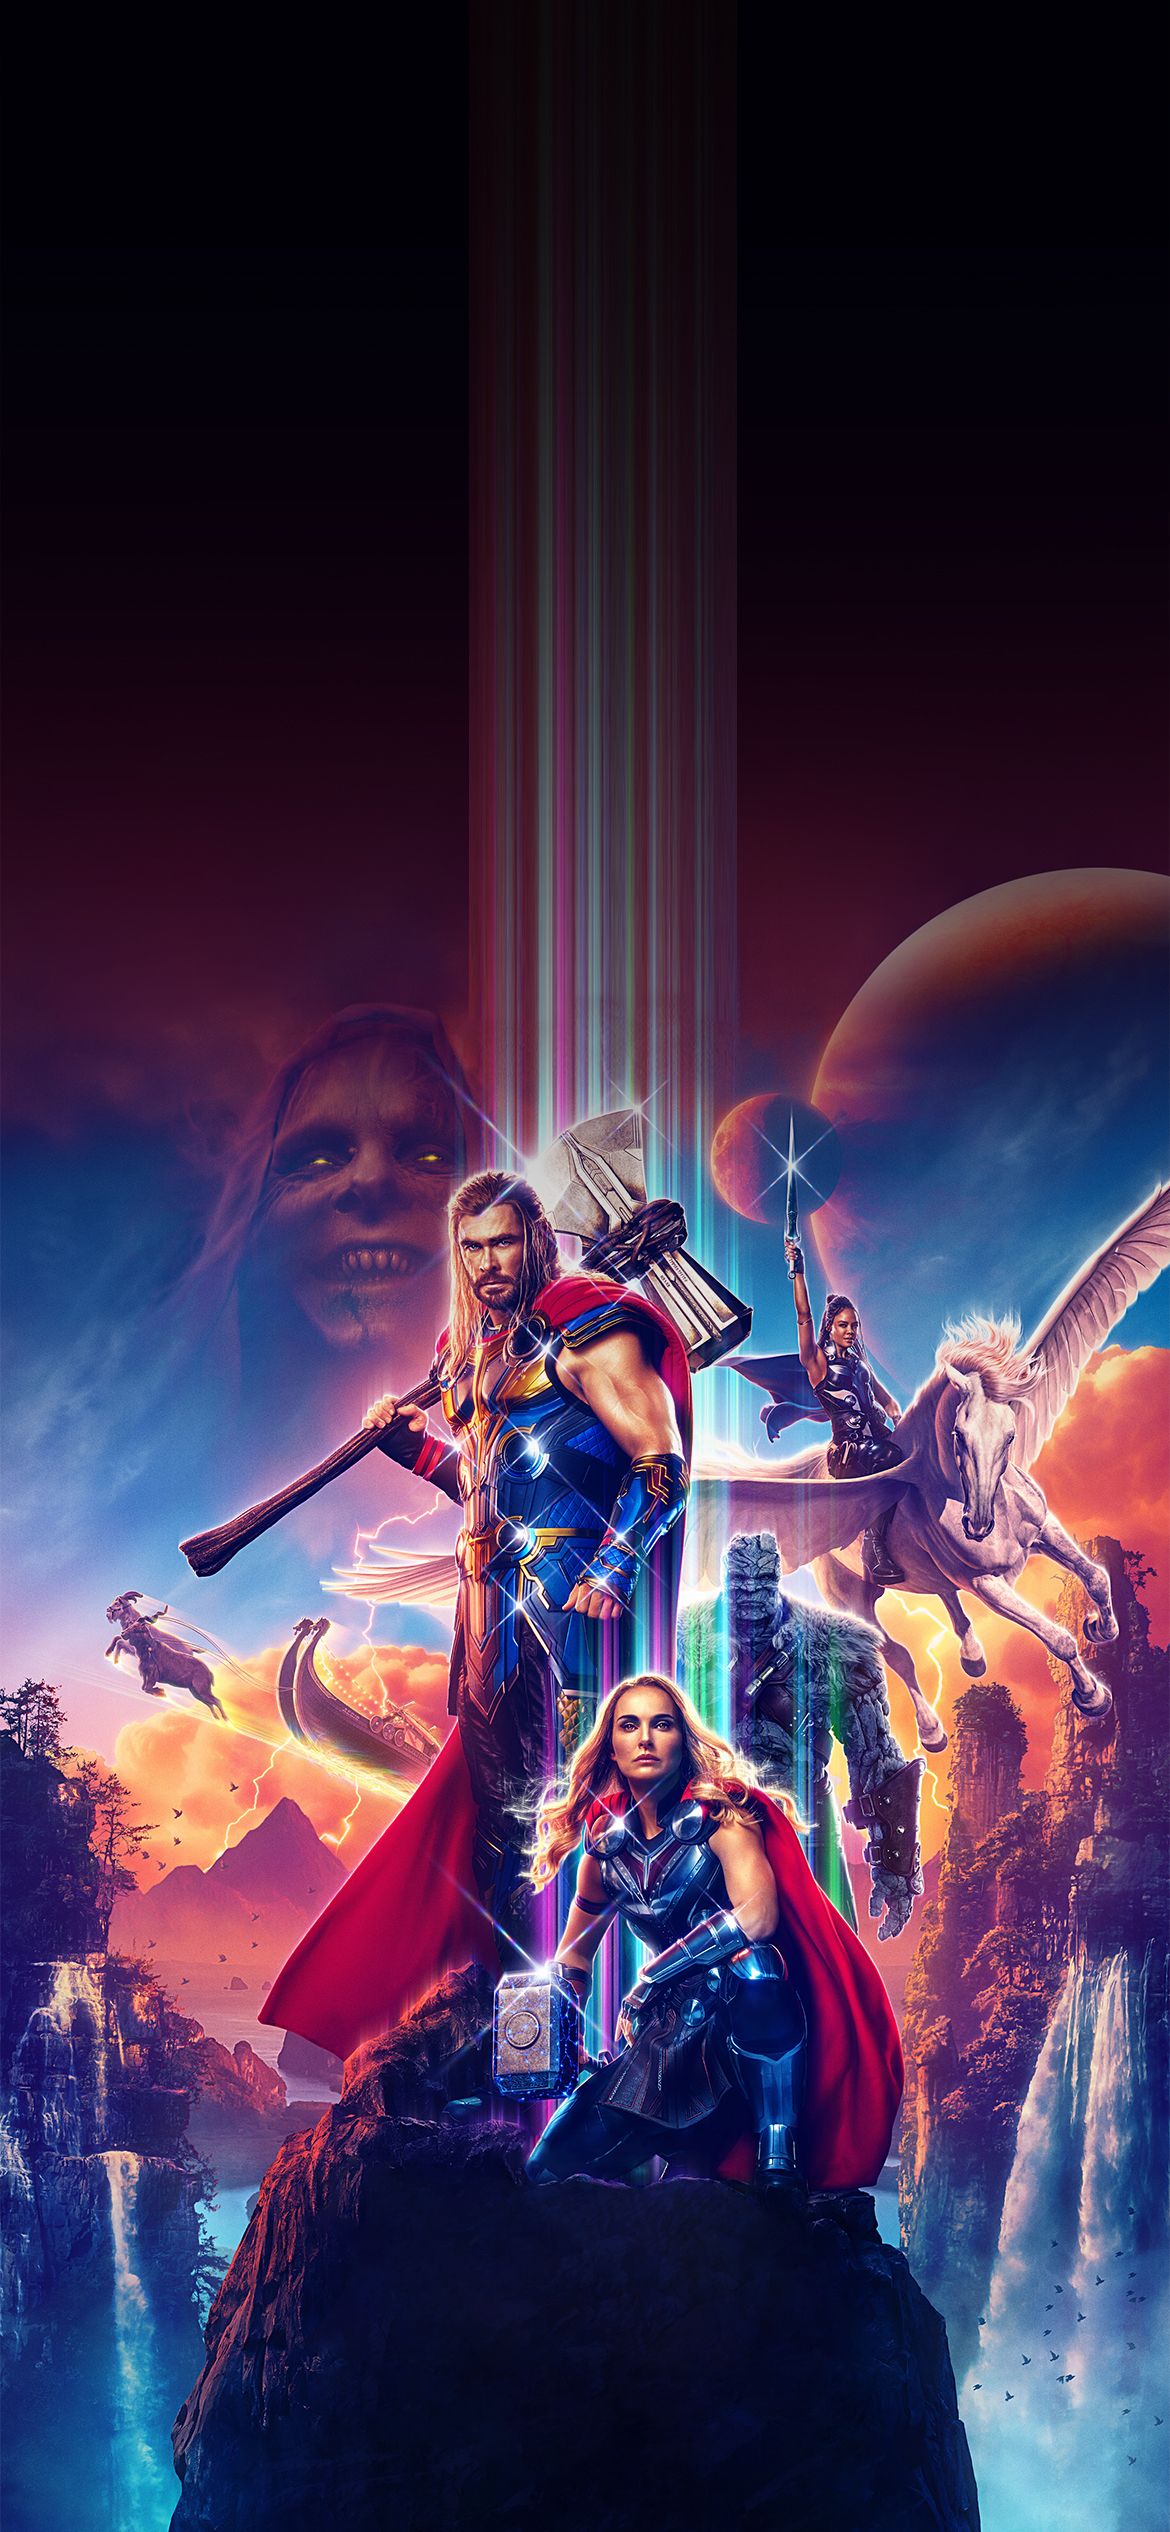 Thor: Ragnarok is a 2017 American superhero film based on the Marvel Comics character Thor, produced by Marvel Studios and distributed by Walt Disney Studios Motion Pictures. - Thor